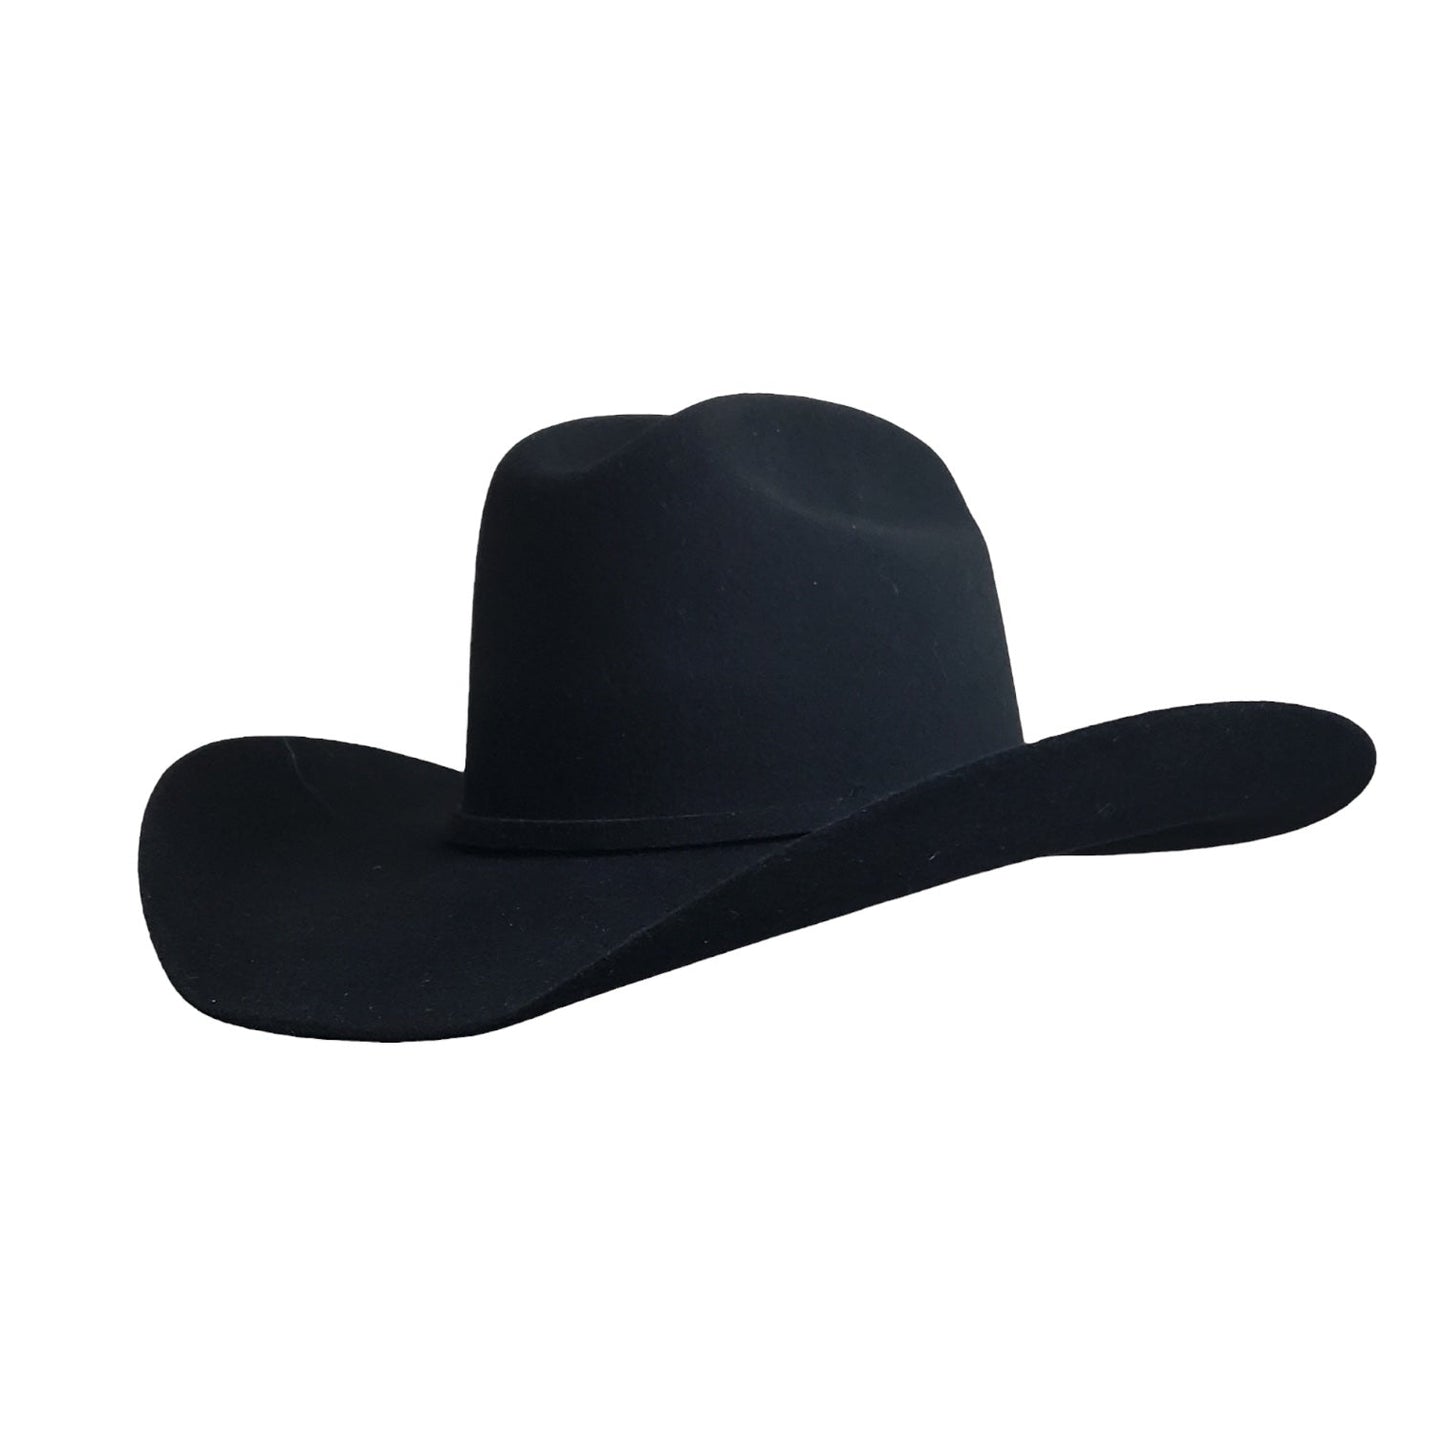 Gone Country Yellowstone black cowboy hat